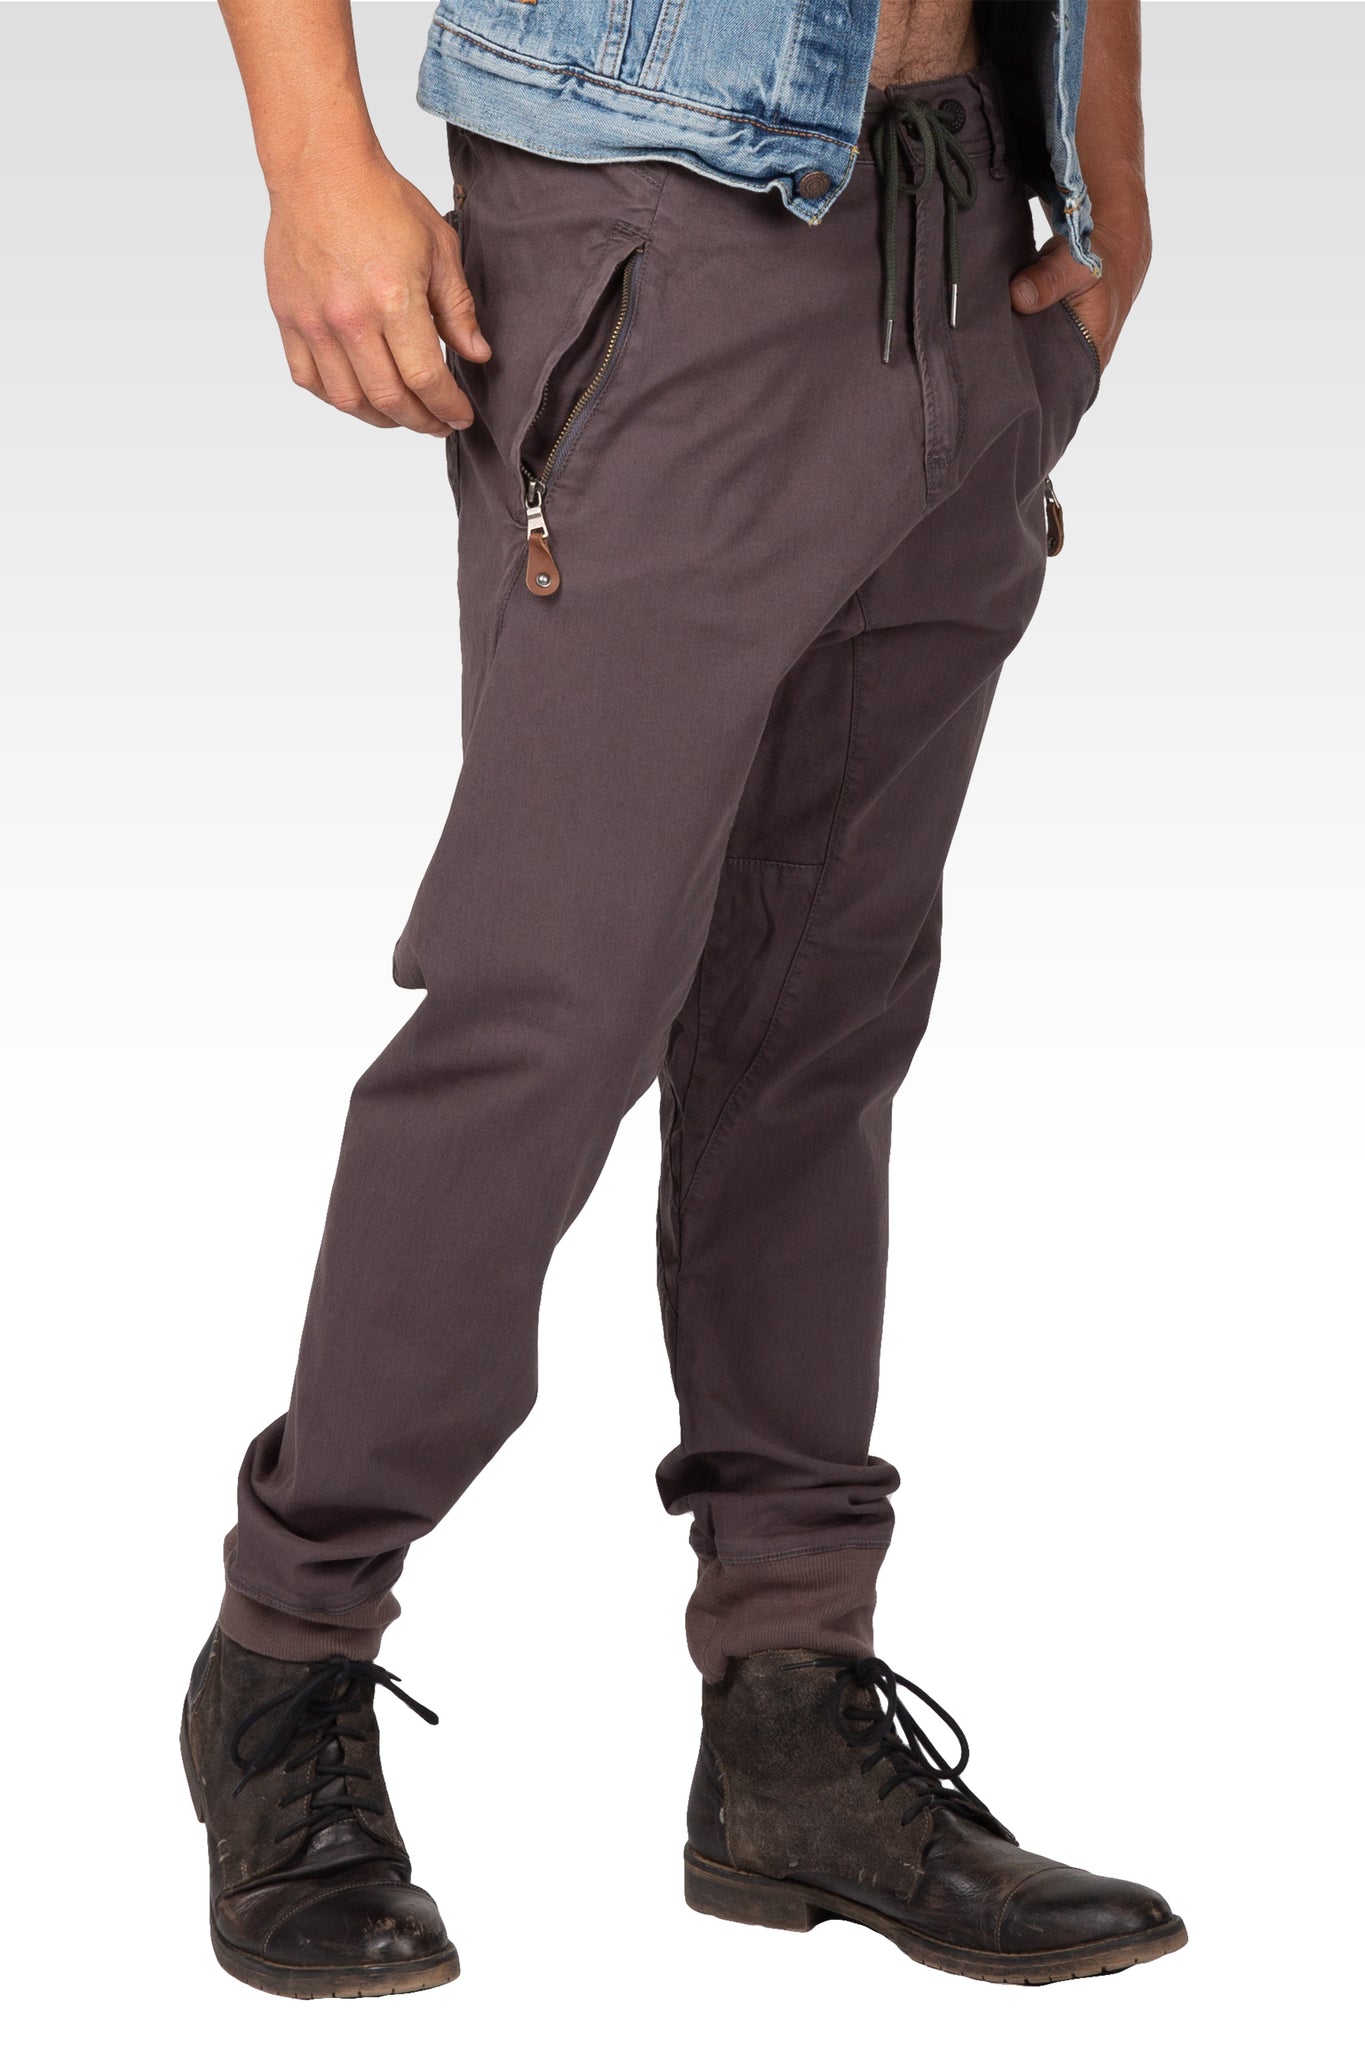 Drop Crotch Premium Washed Charcoal Stretch Twill Jogger Pants With Zipper Pockets